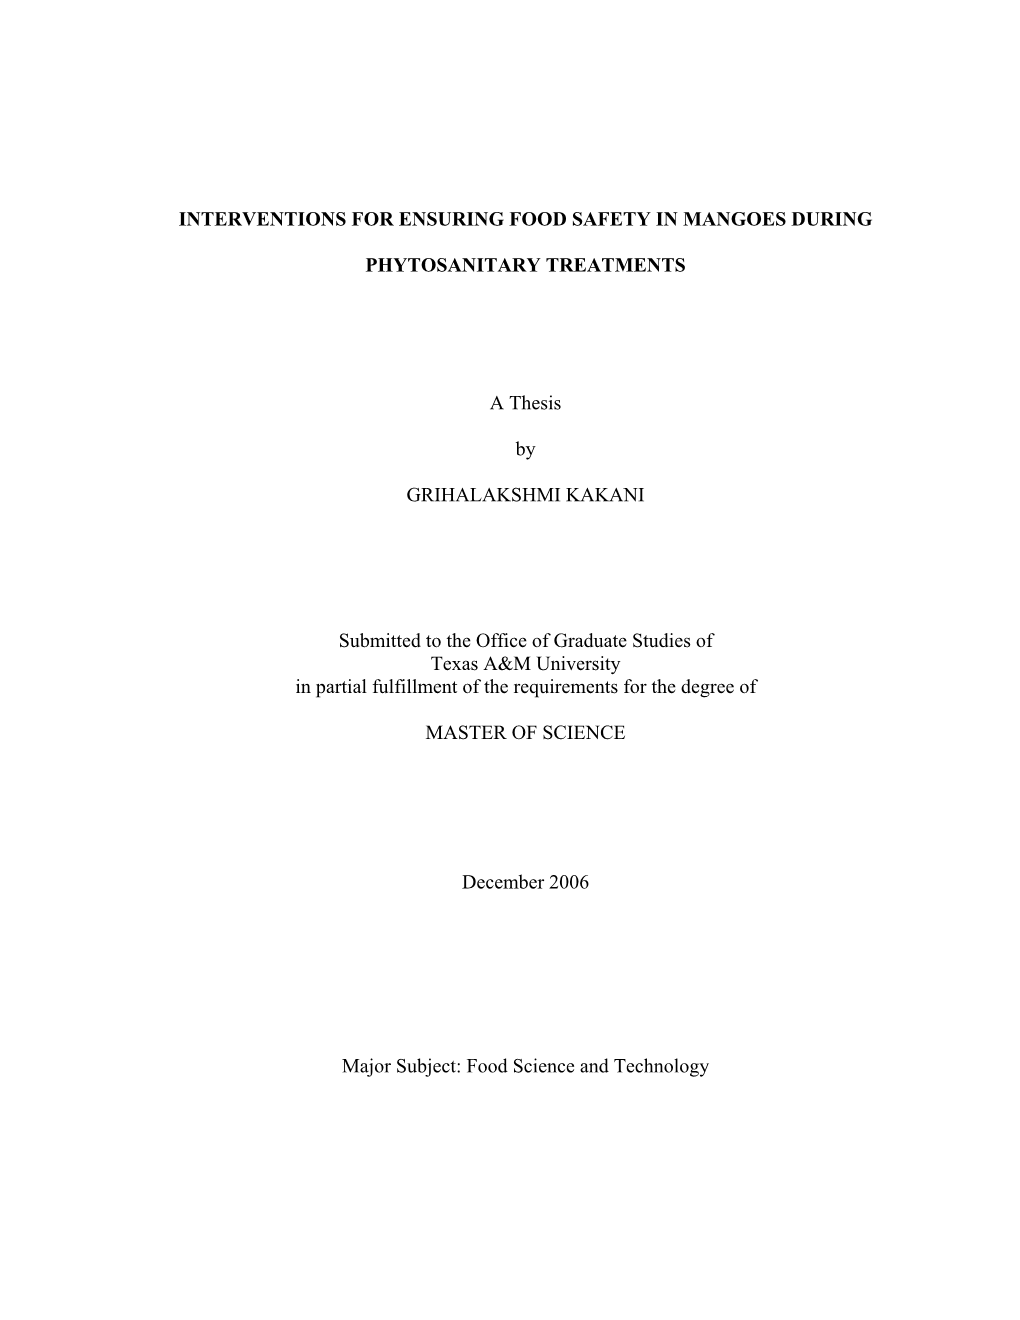 INTERVENTIONS for ENSURING FOOD SAFETY in MANGOES DURING PHYTOSANITARY TREATMENTS a Thesis by GRIHALAKSHMI KAKANI Submitted to T